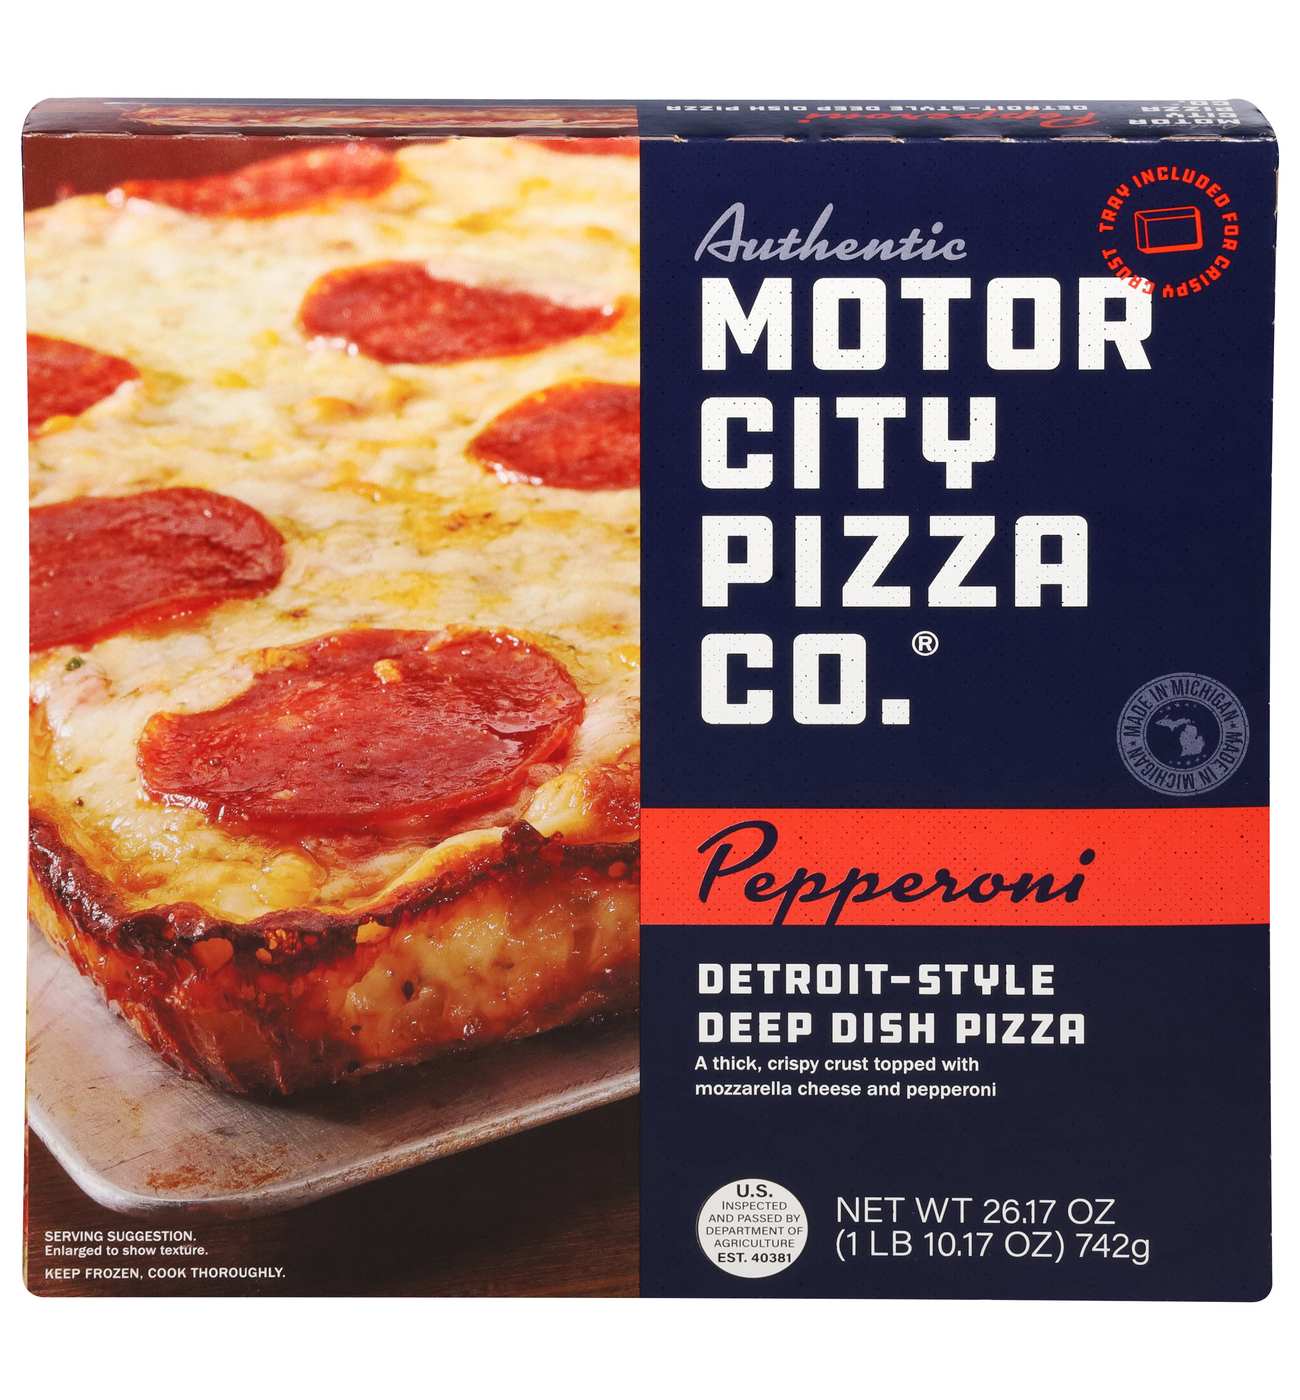 Authentic Motor City Pizza Co. Detroit-Style Deep Dish Frozen Pizza - Pepperoni ; image 1 of 2